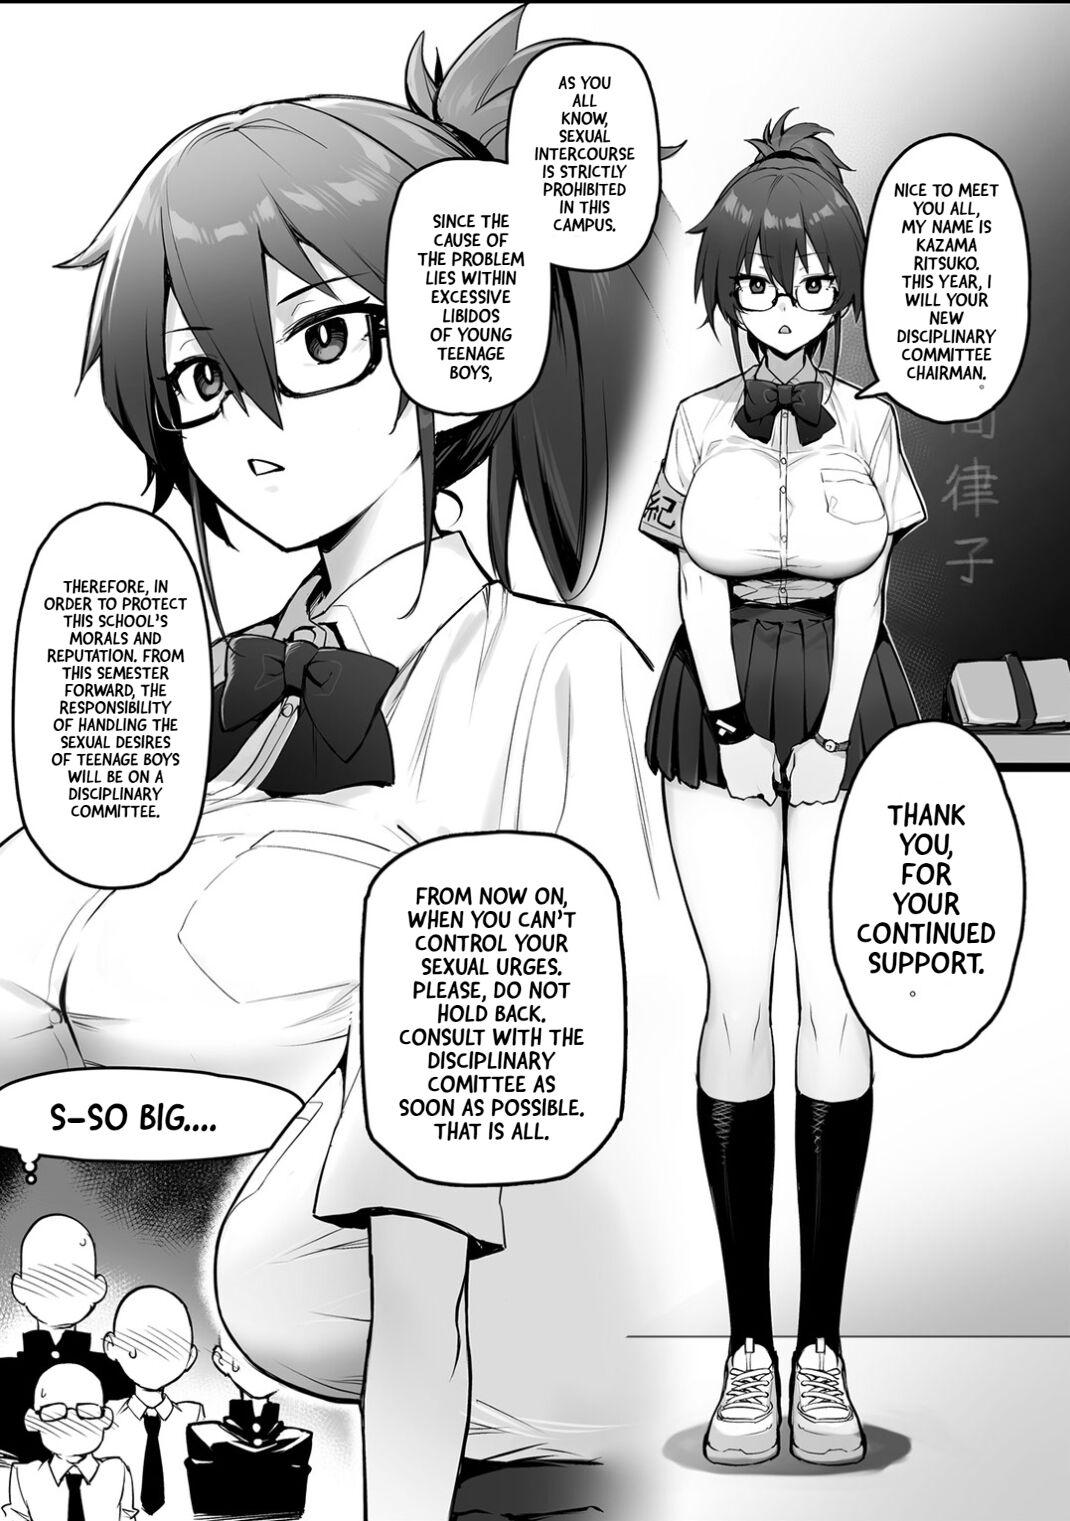 Bath Rumor Has It That The New Chairman of Disciplinary Committee Has Huge Breasts. Animation - Page 7